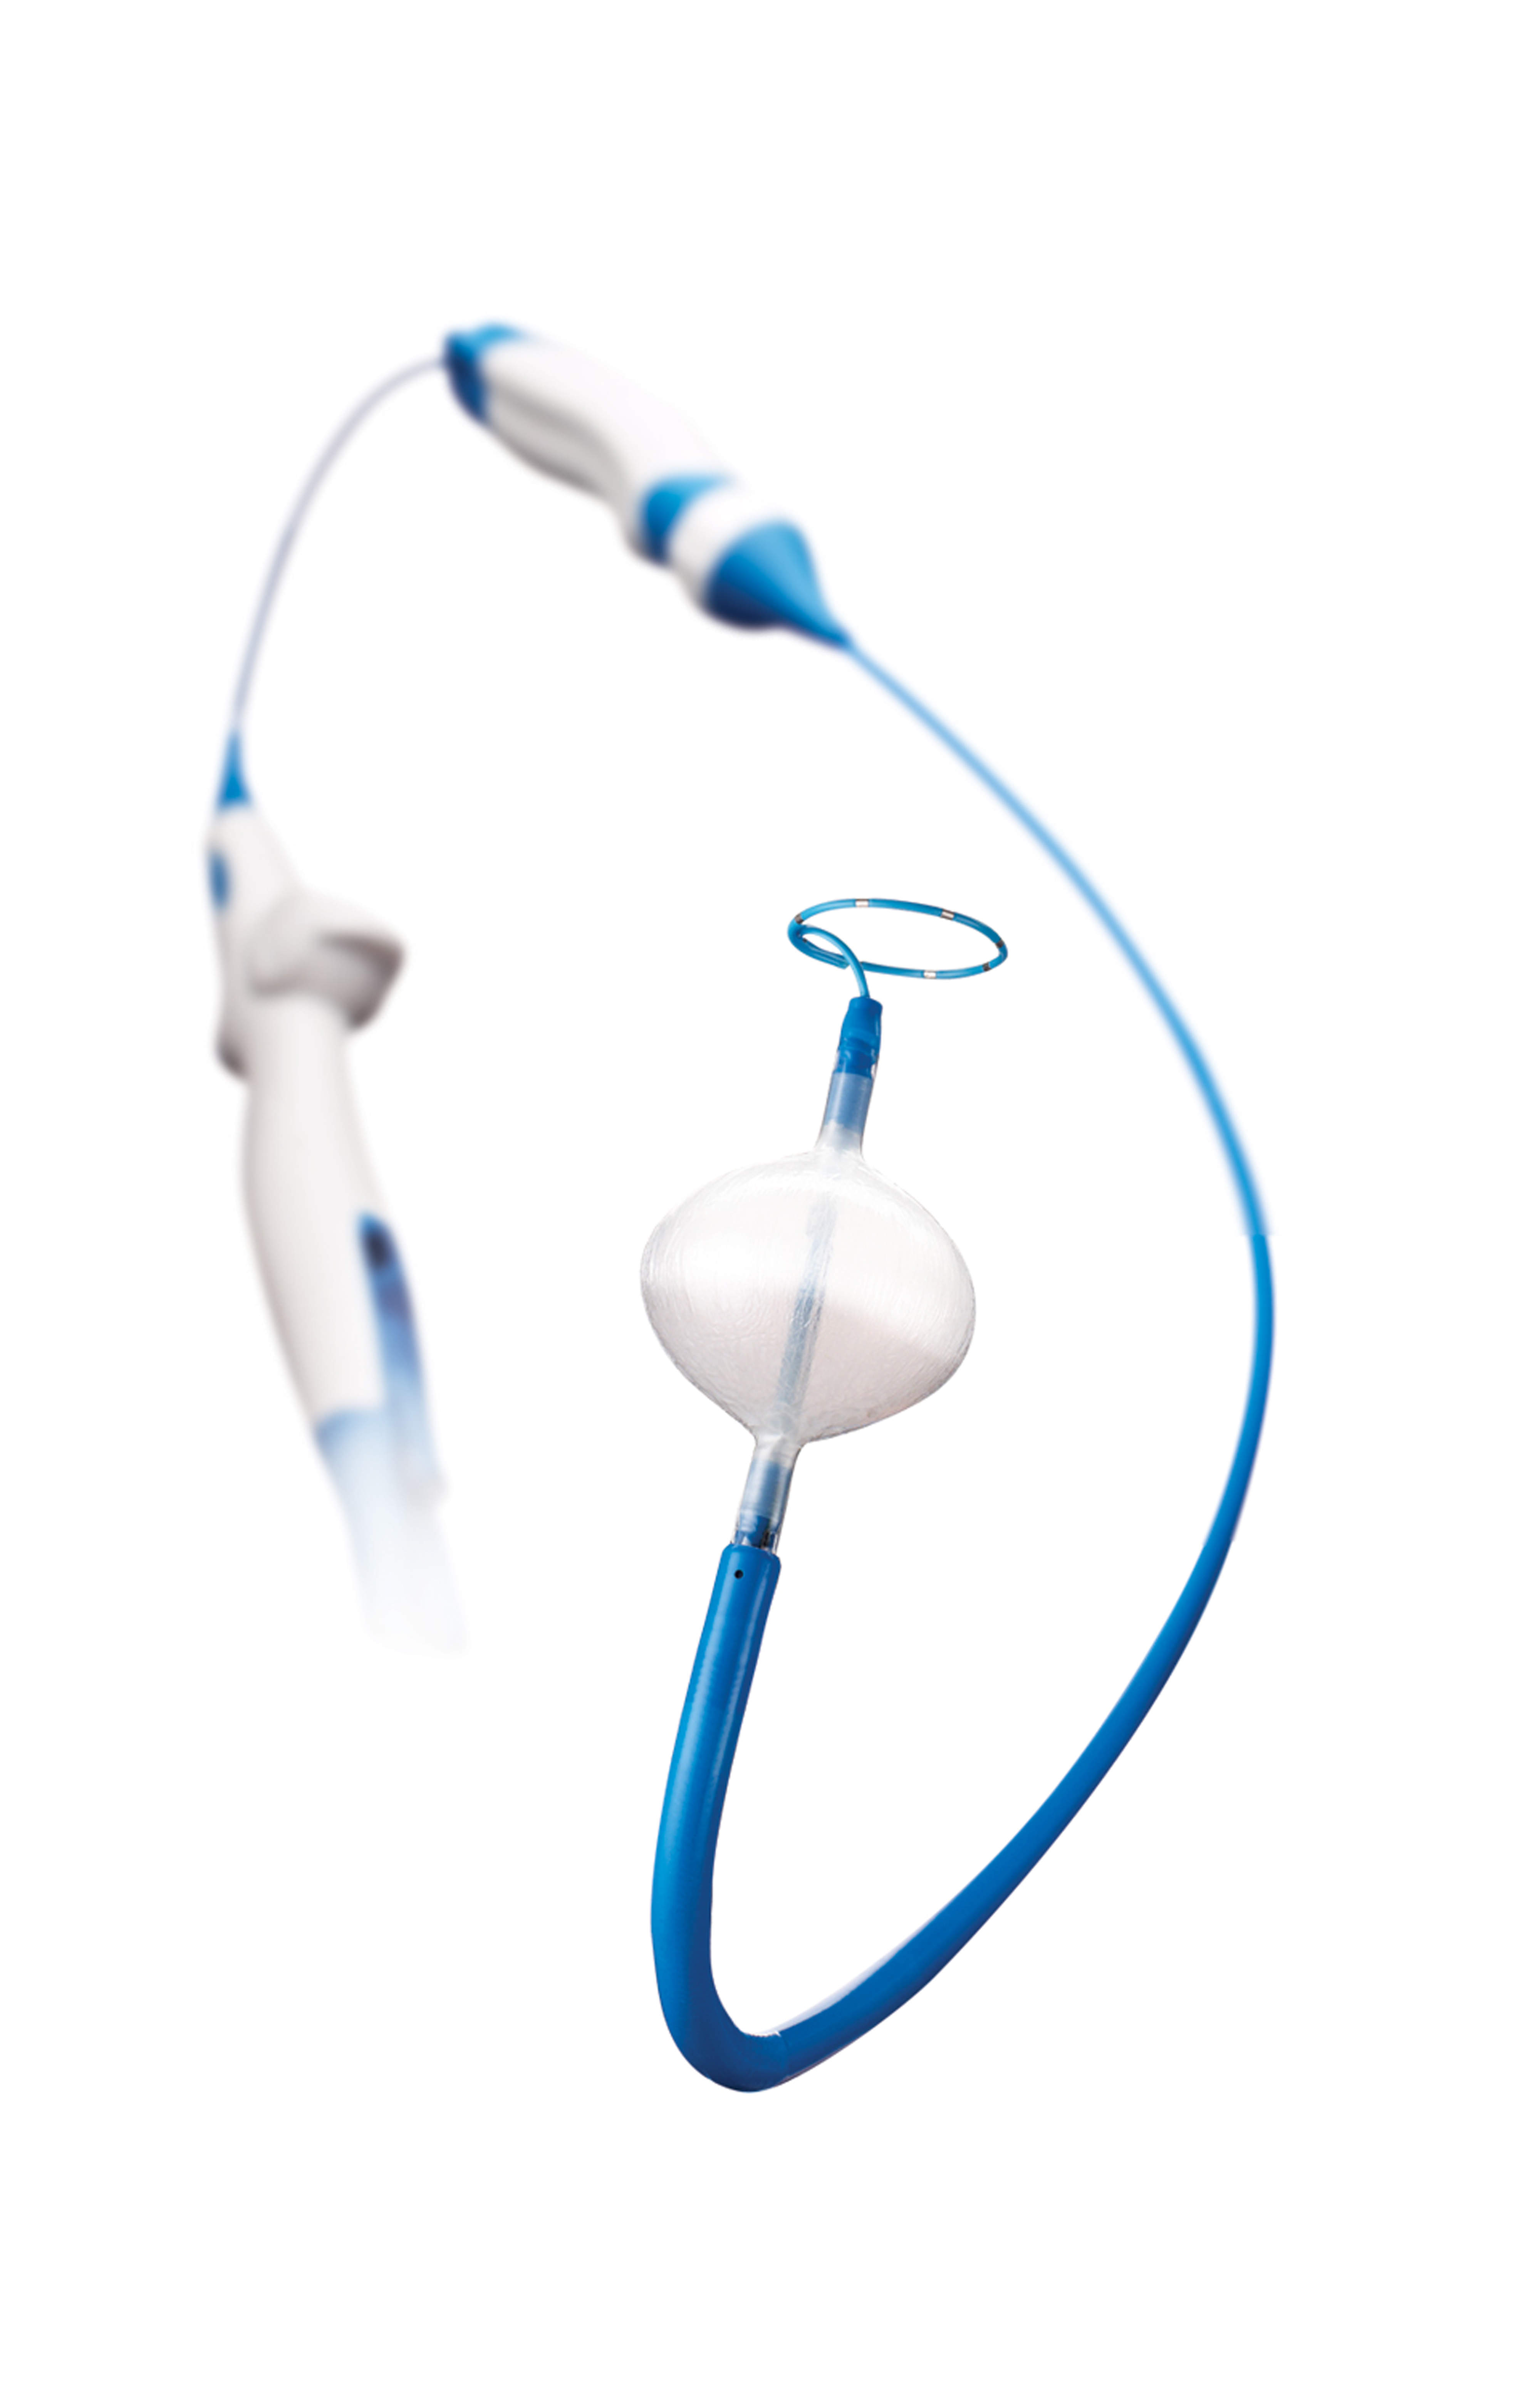 The Medtronic Arctic Front Advance™ Cryoballoon, Achieve® Map